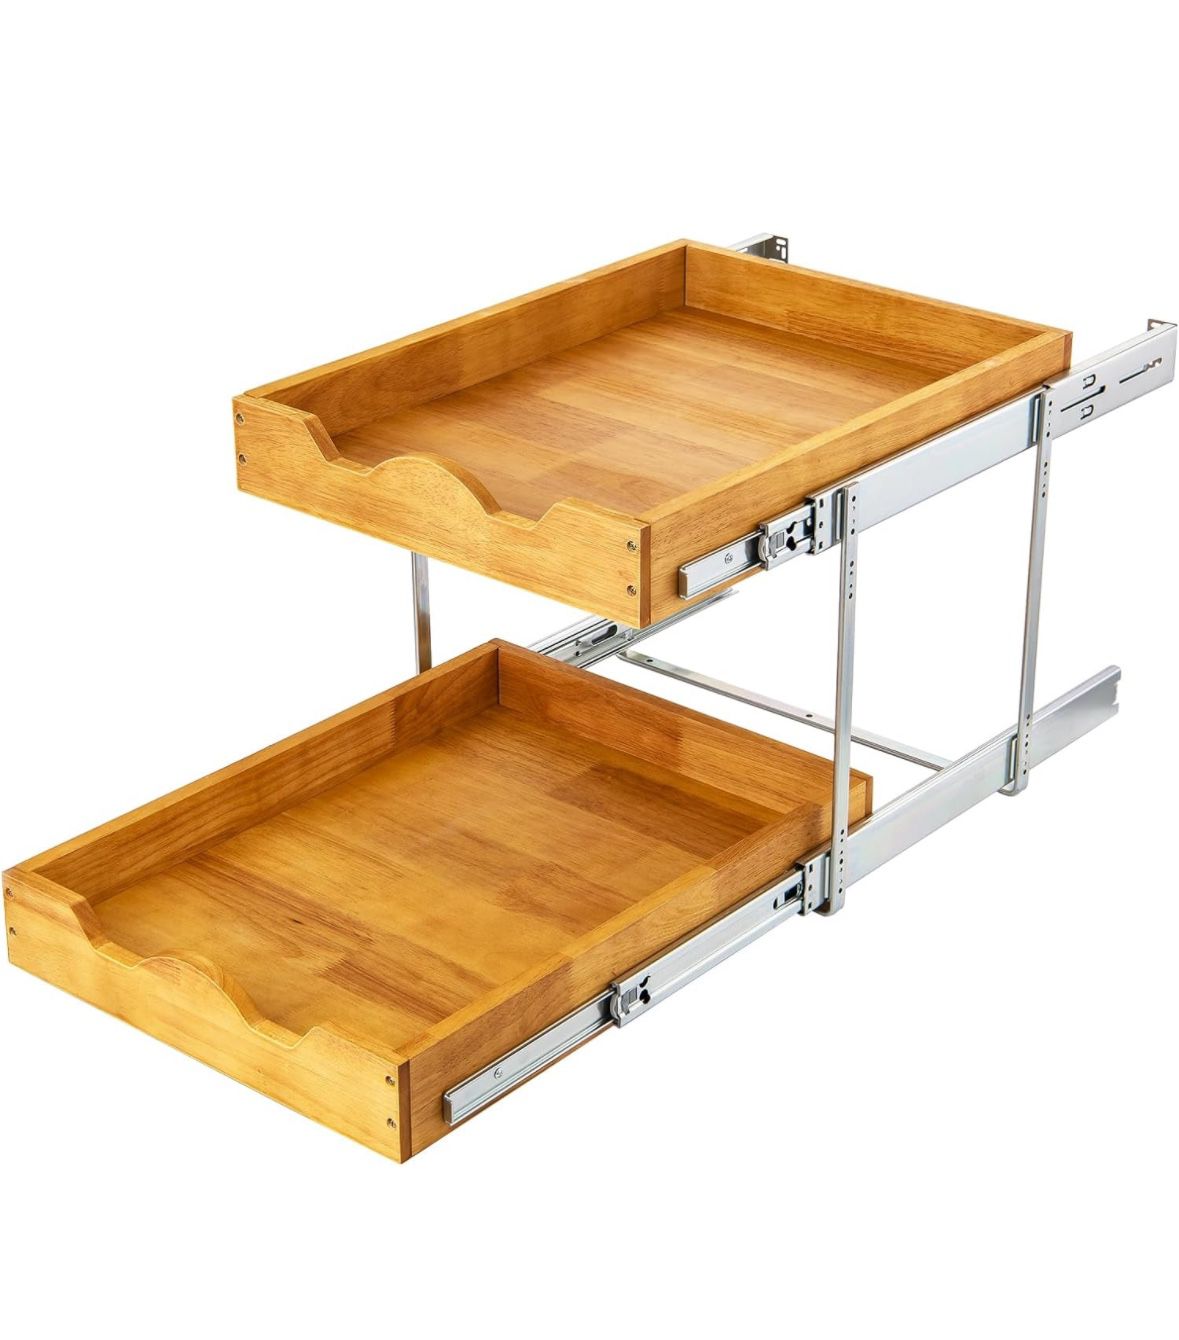 NEW! 2 Tier Pull Out Cabinet Organizer (20" W x 21" D) Wood And Metal Double Tier Slide Out Wood Drawer Under Cabinet Storage Organization